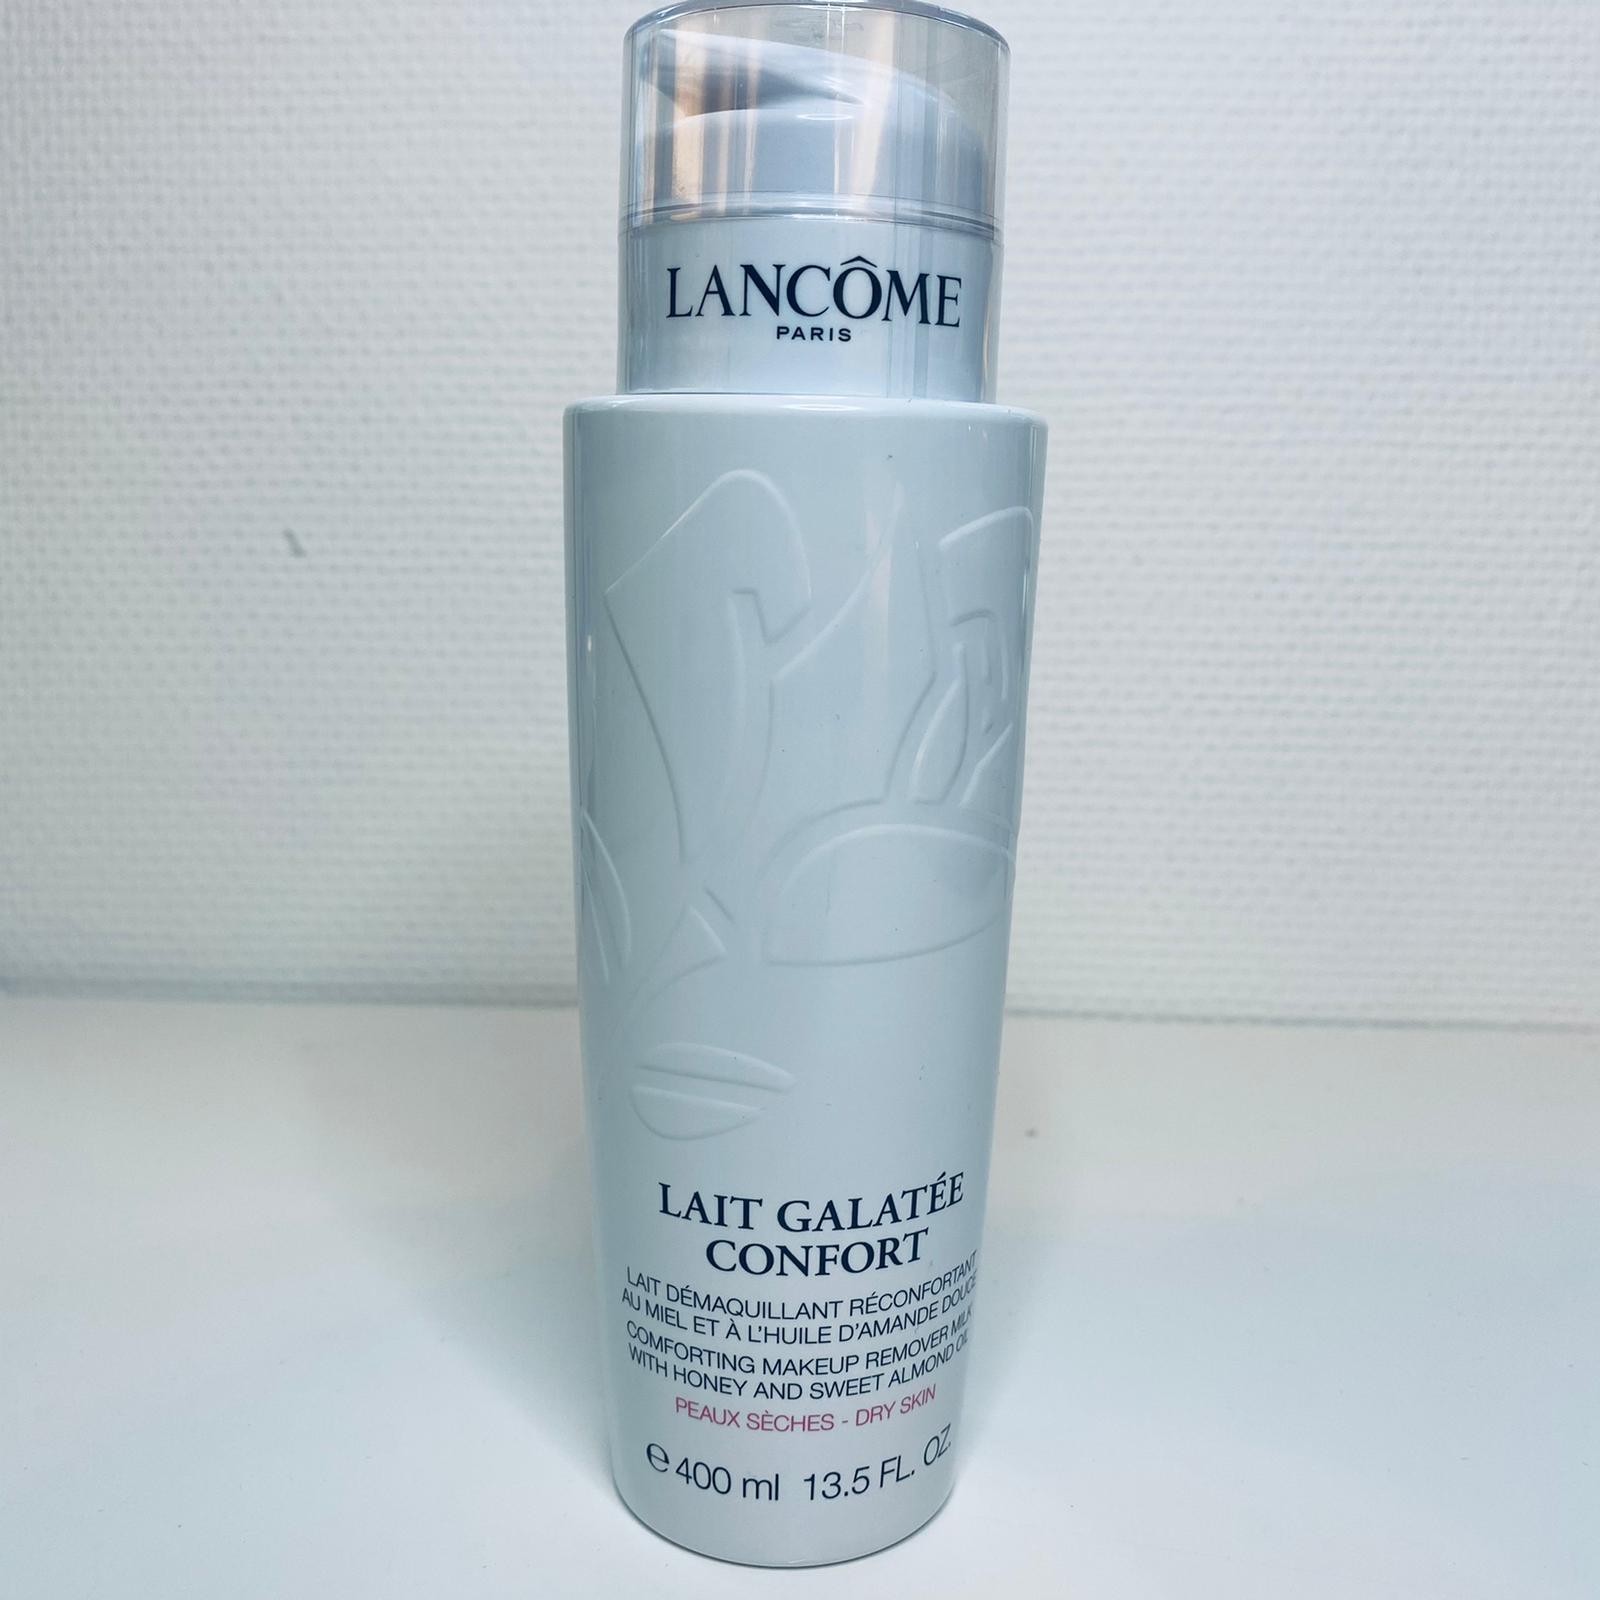 Lancome Lait Galatee confort makeup remover dry skin